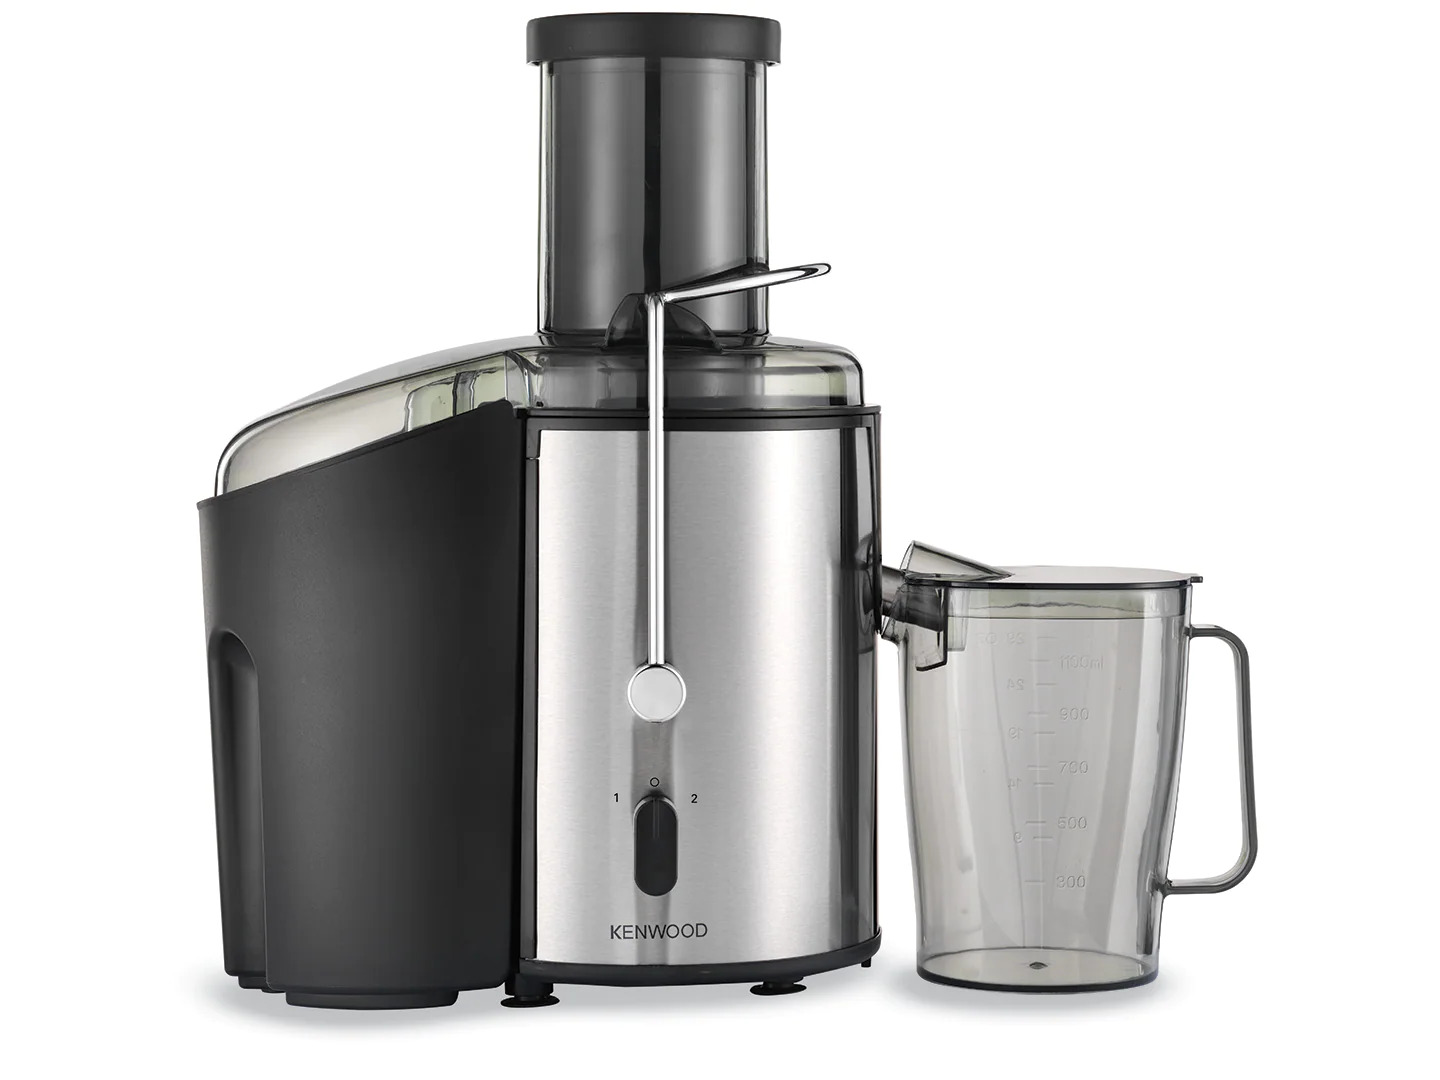 Kenwood Accent Collection Centrifugal Juicer, Black and Silver - JEM02.A0BK